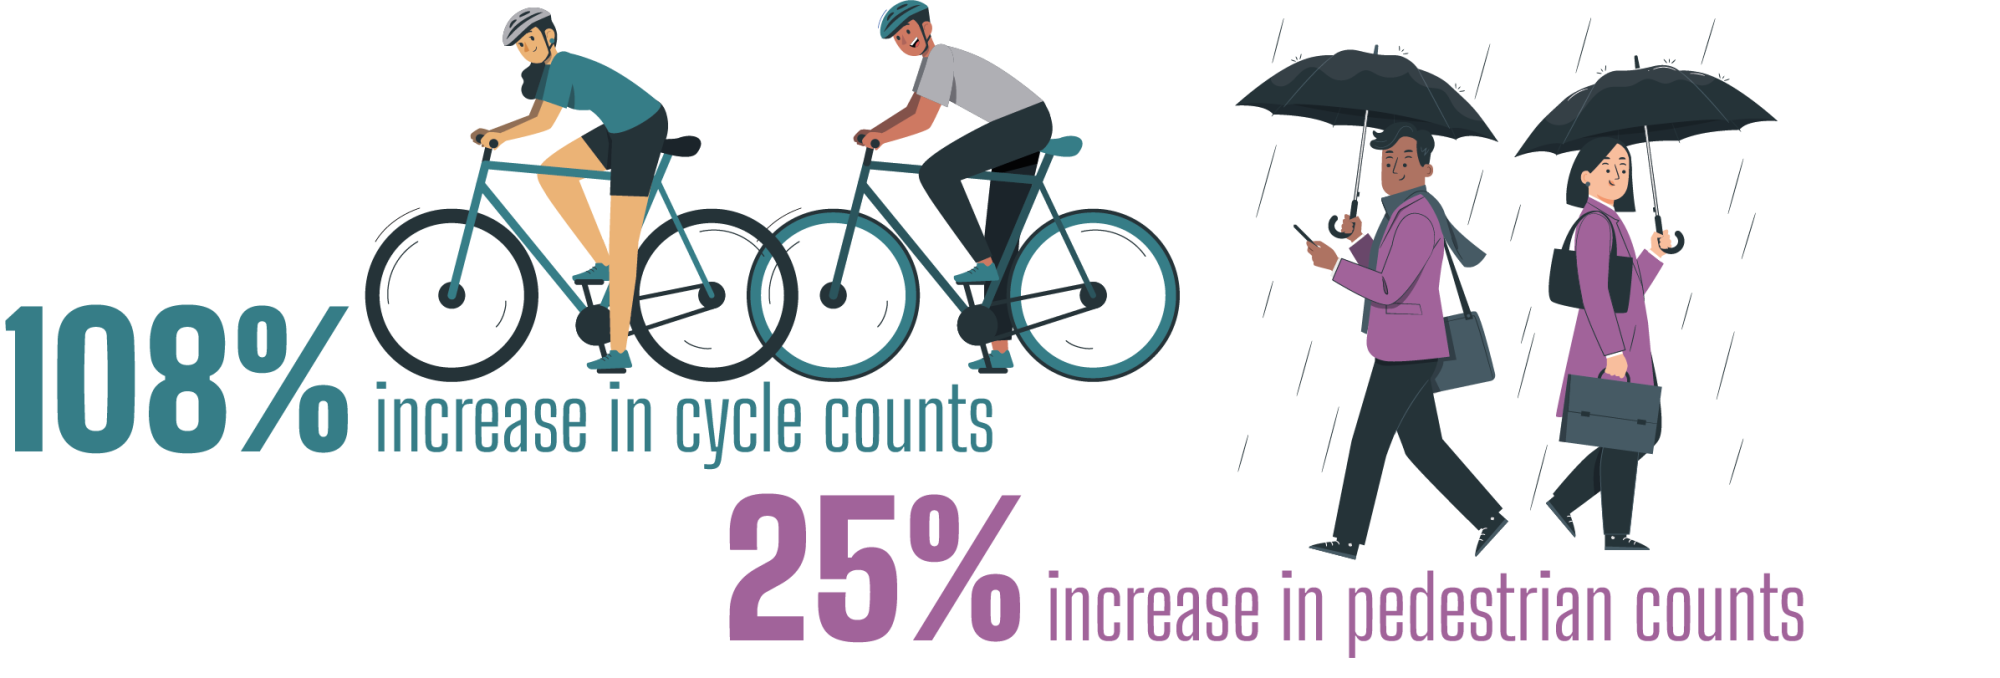 108% increase in cycle counts in East Dunbartonshire from 2019 to 2020 25% increase in pedestrian counts